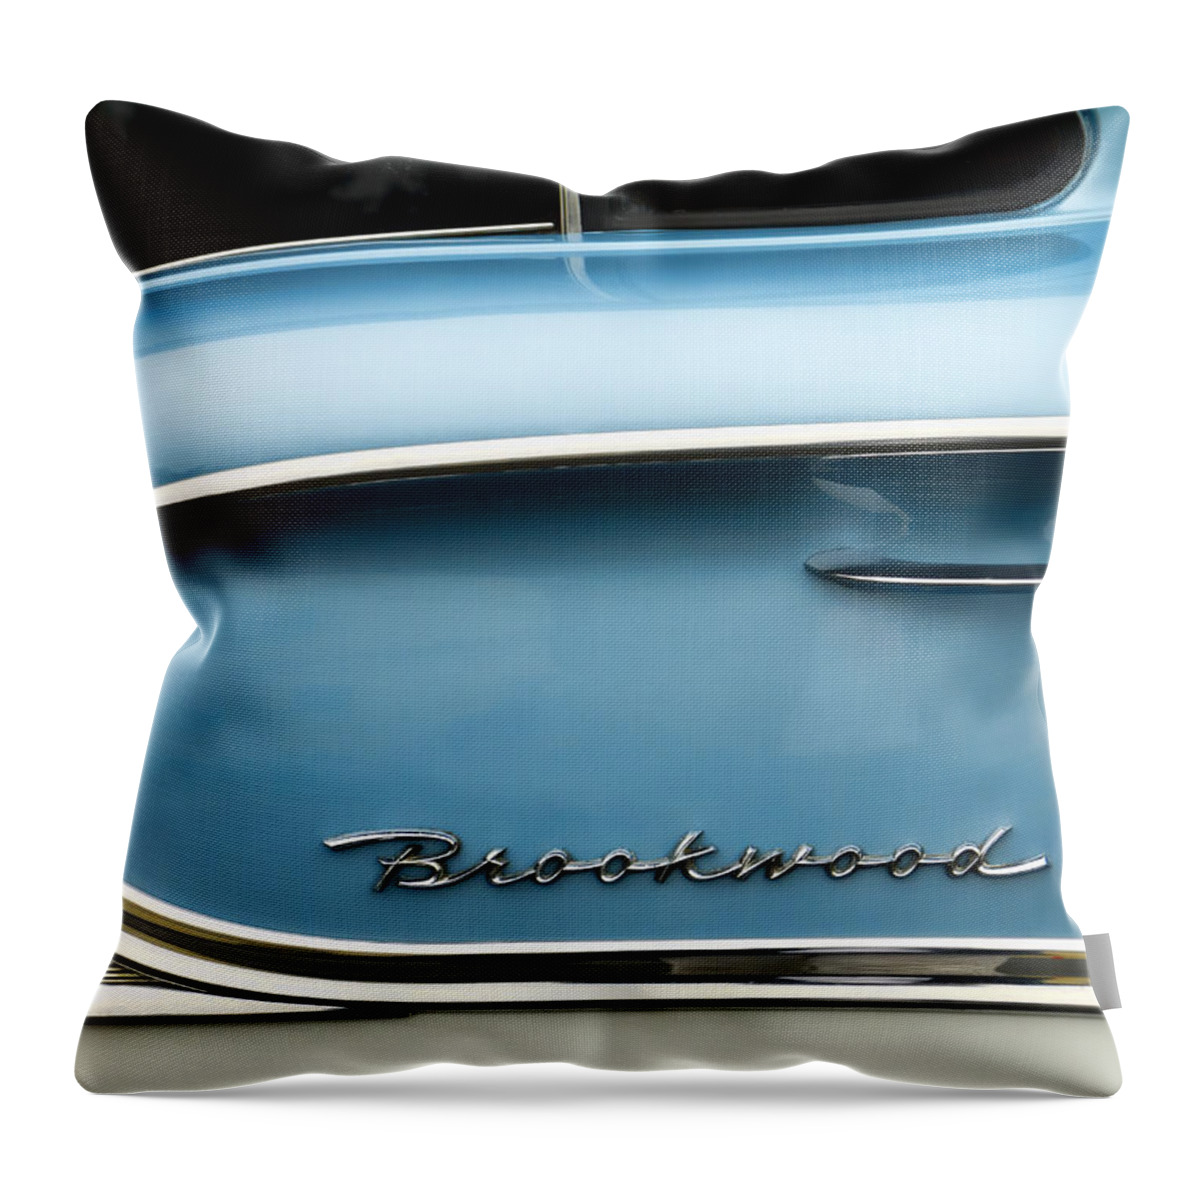 1958 Throw Pillow featuring the photograph 1958 Chevrolet Brookwood Station Wagon by Carol Leigh